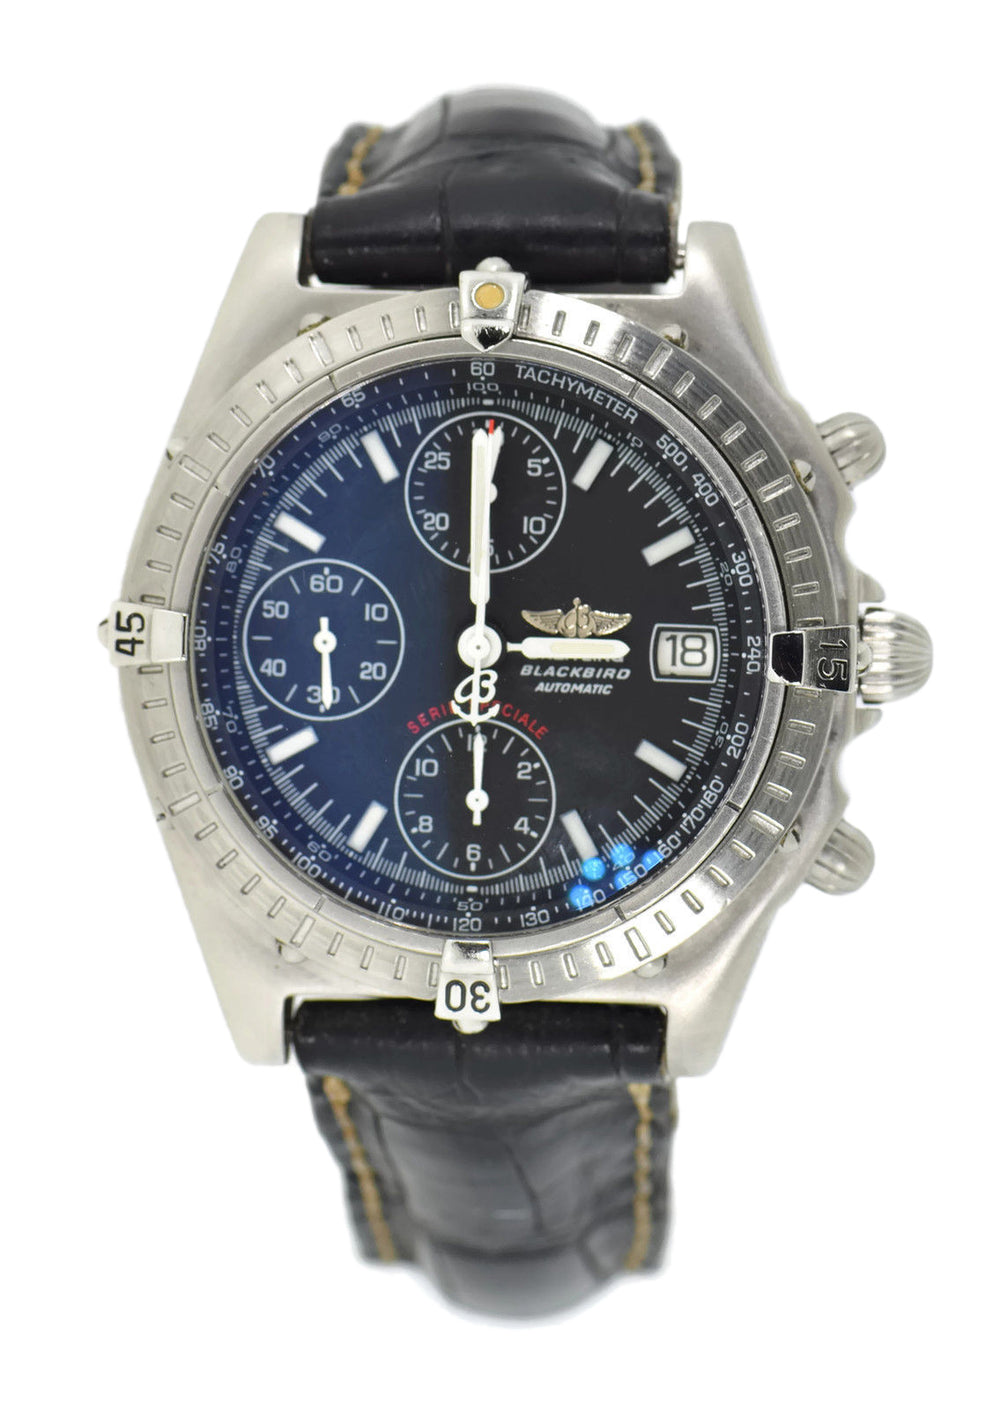 Breitling Chronomat Series Speciale A13050.1 3